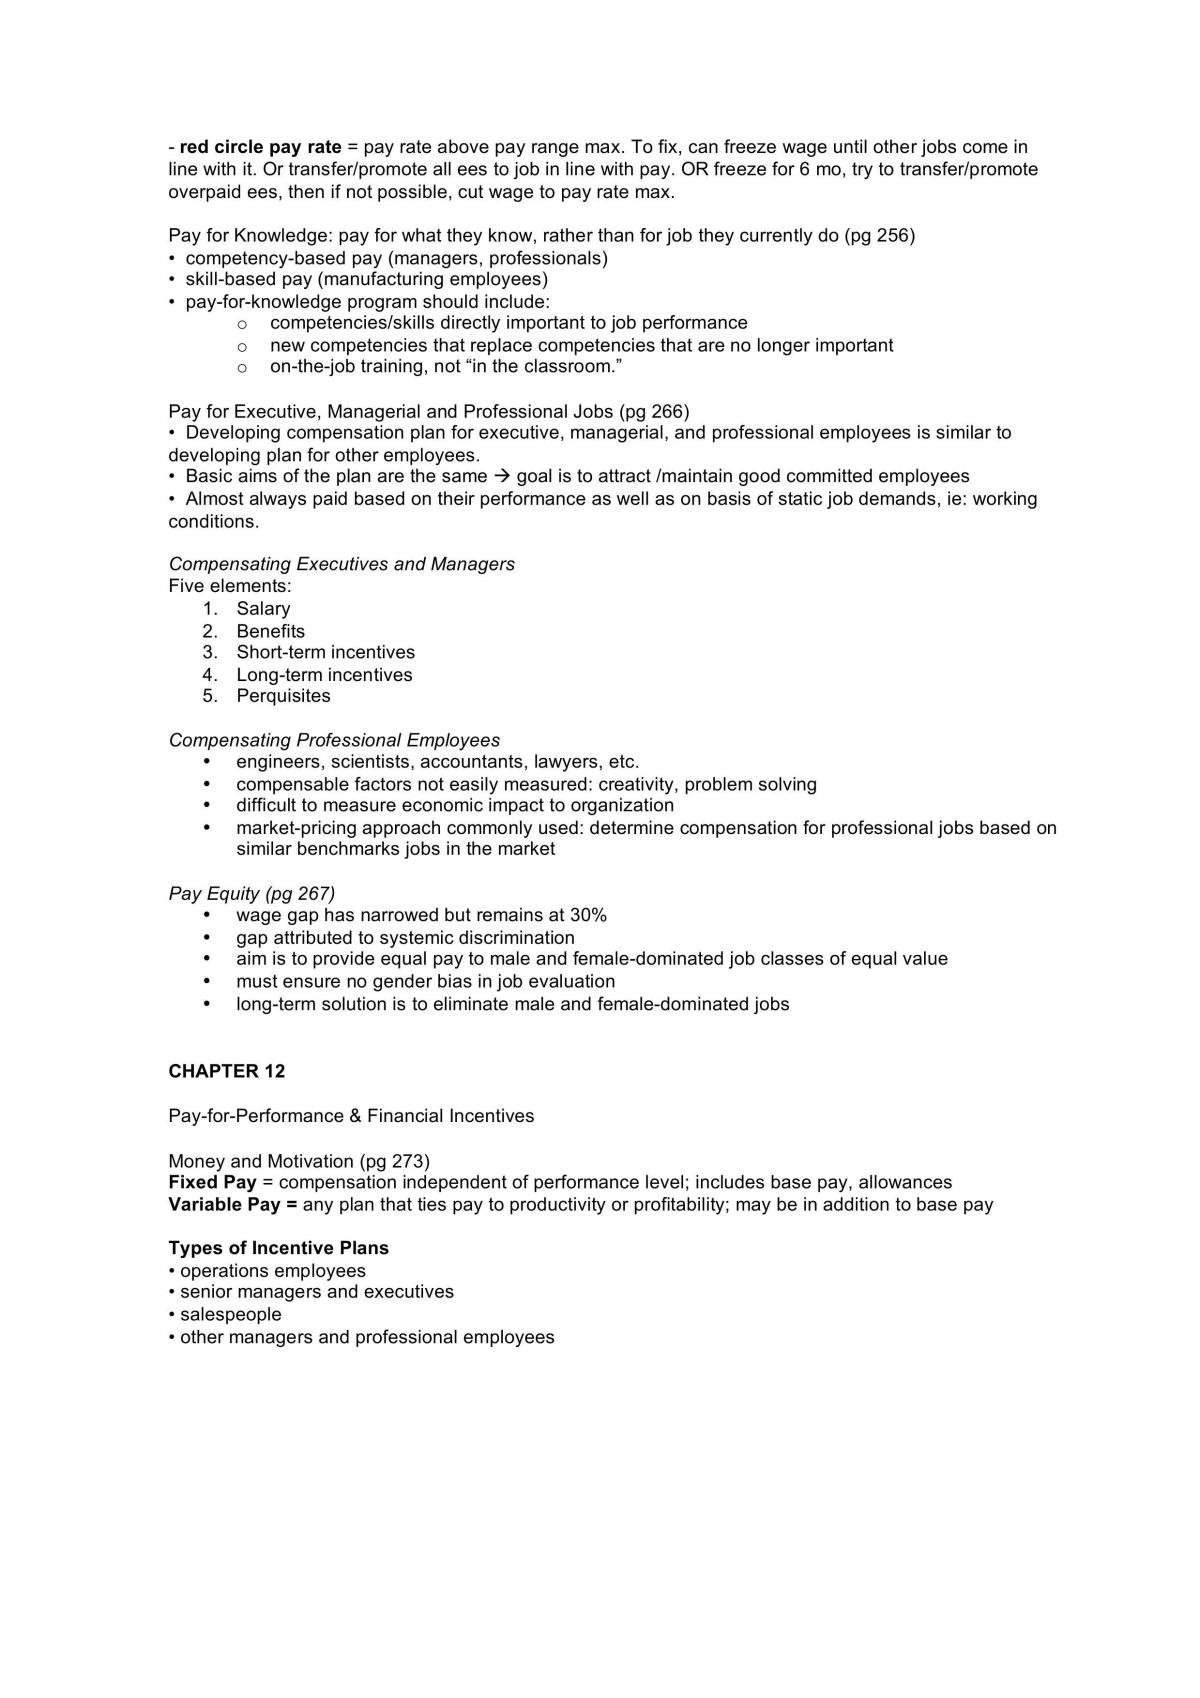 Human Resource Management Course Summary - Page 32